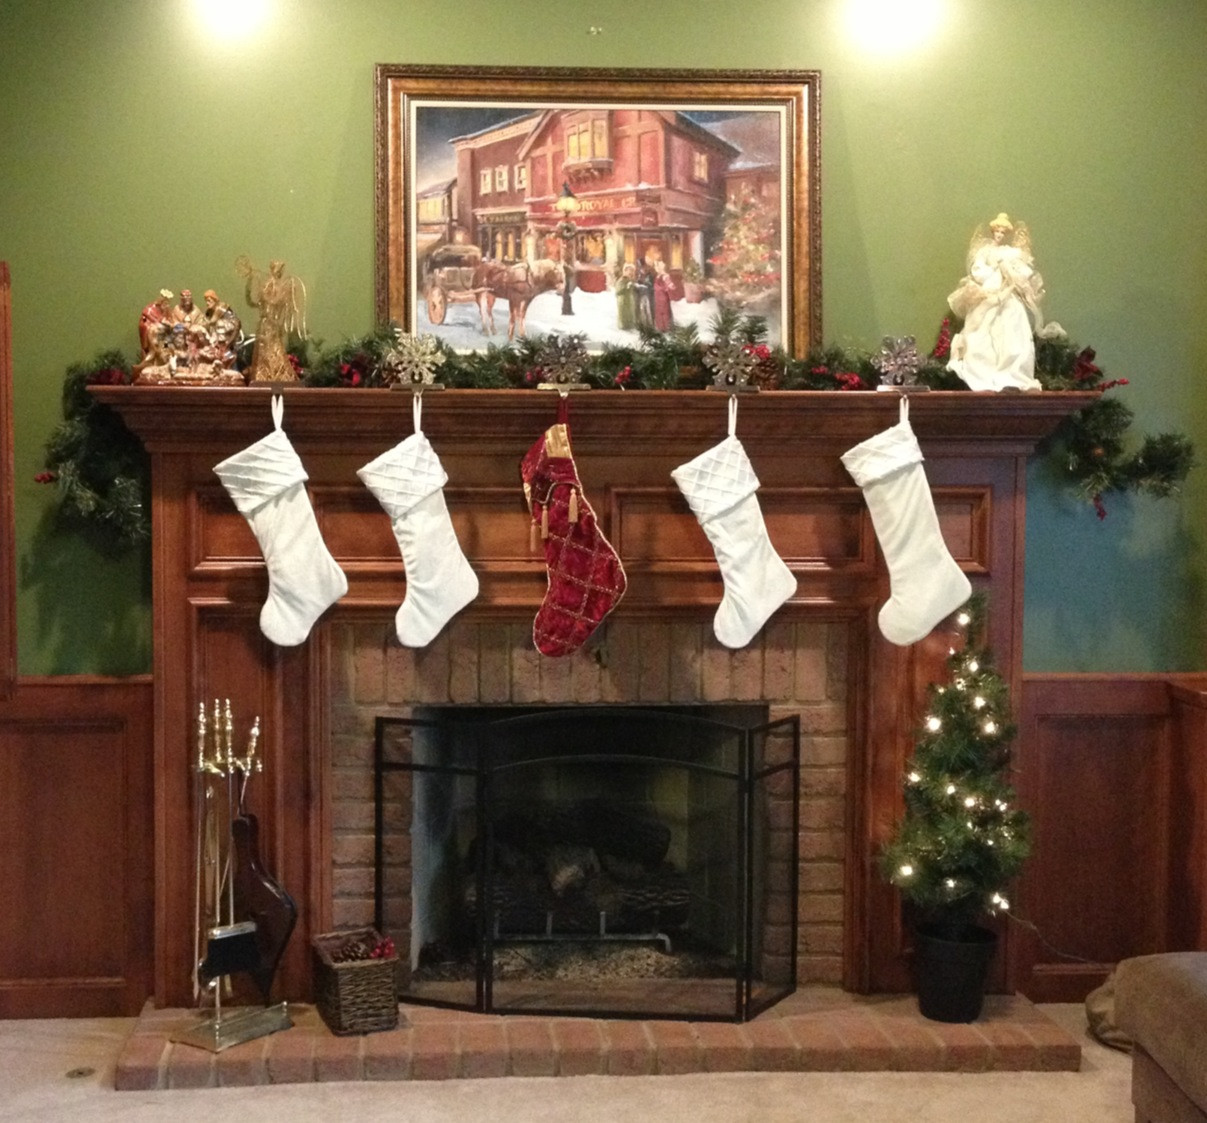 Christmas Stockings Hanging Over Fireplace
 15 Ways to Keep Christ in Christmas Women Living Well